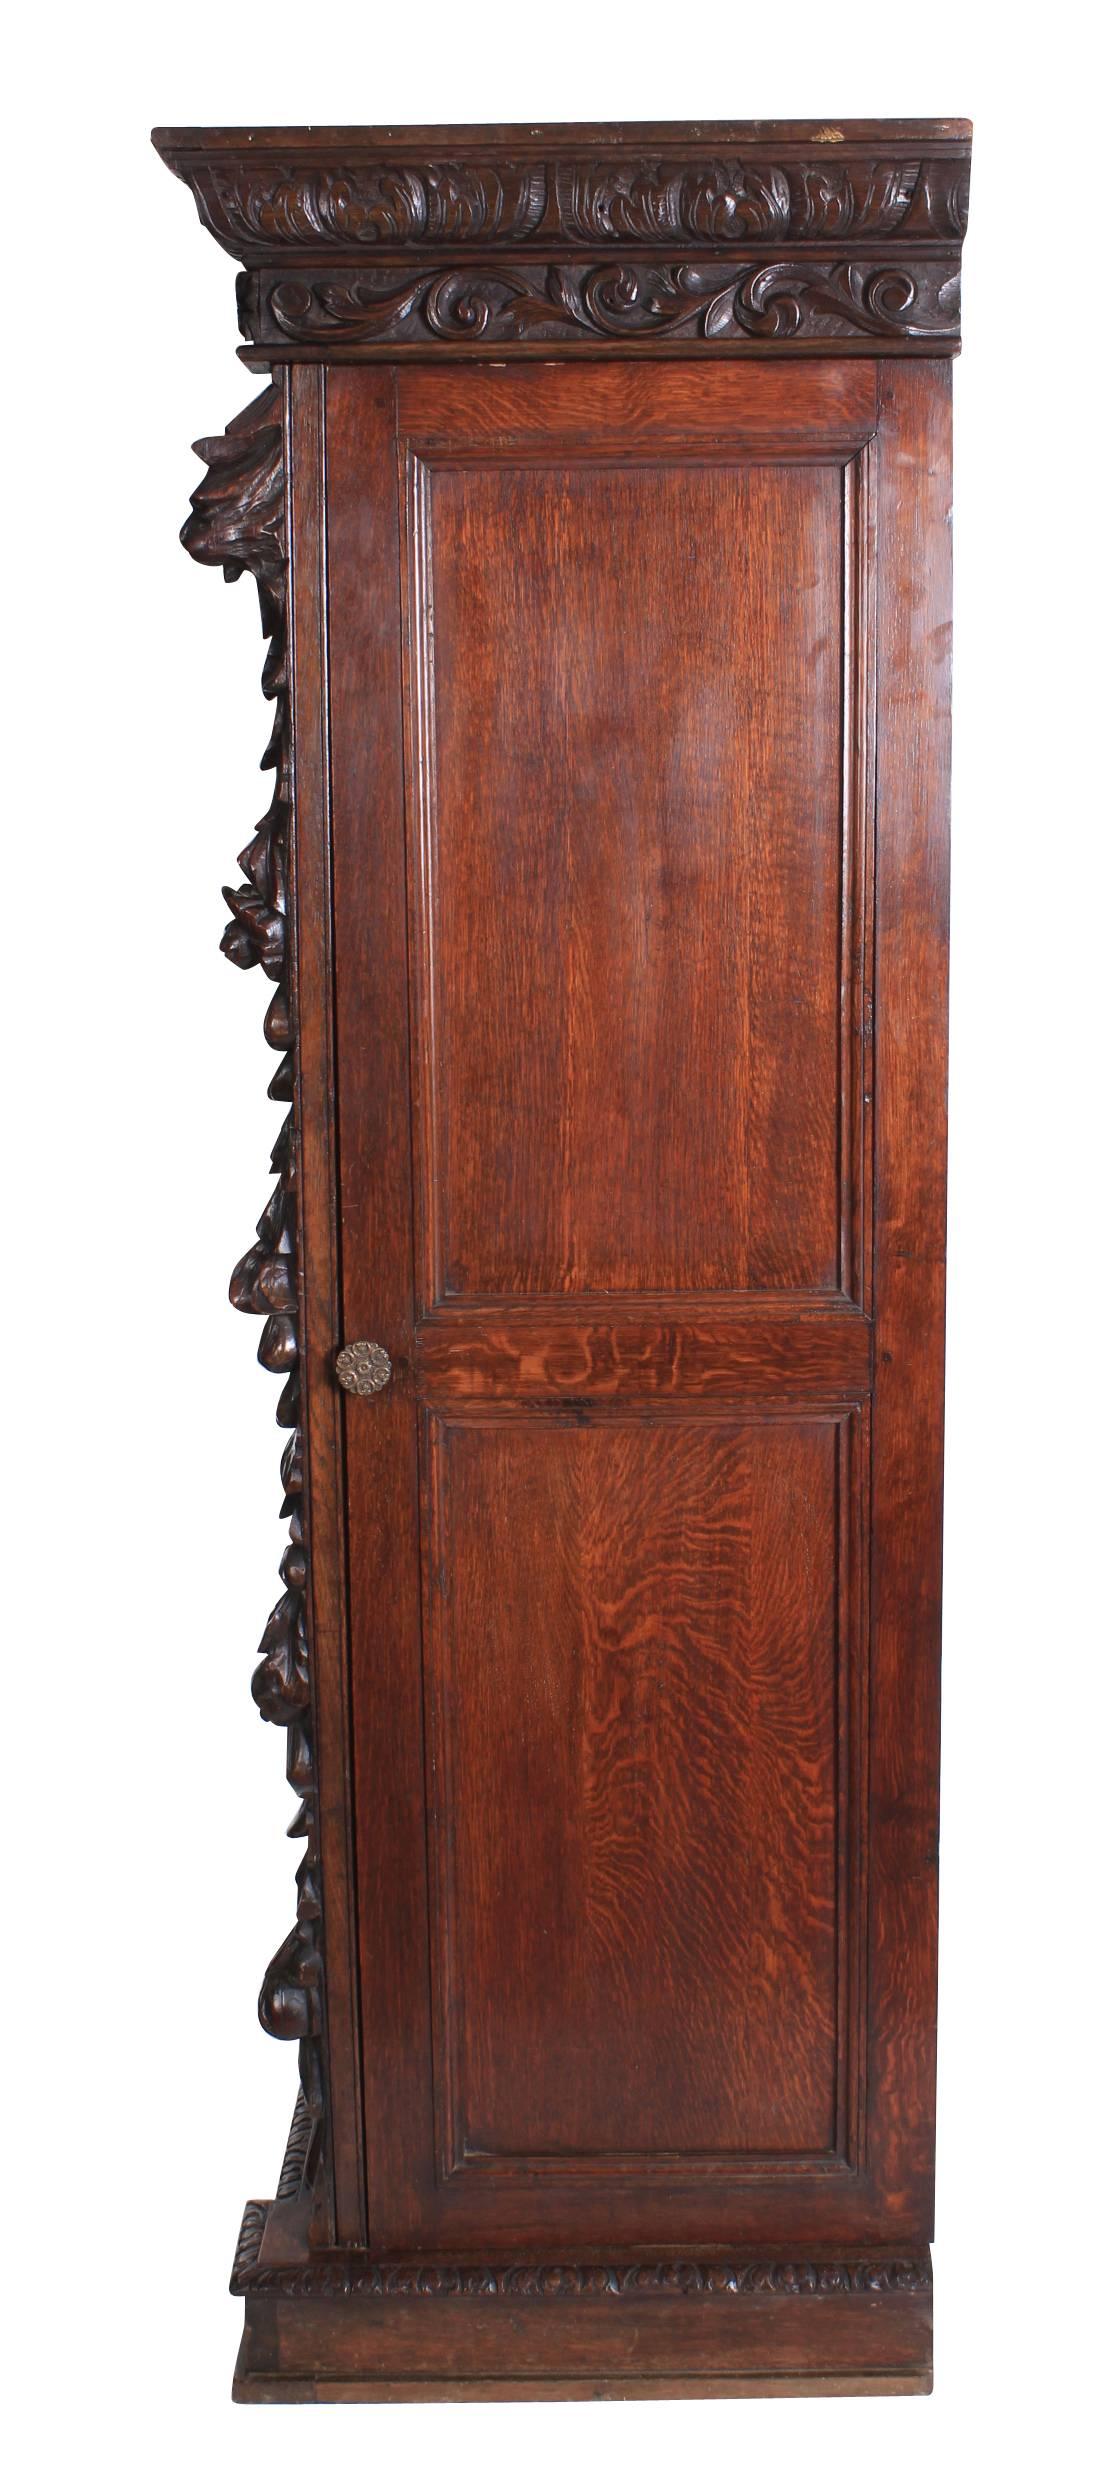 English, circa 1880.
An impressive hall cupboard in great condition.
Profusely carved cornice which can be removed for easy transport, and a beautiful carved front showing decorative foliage and a central mask.
There are doors either side which